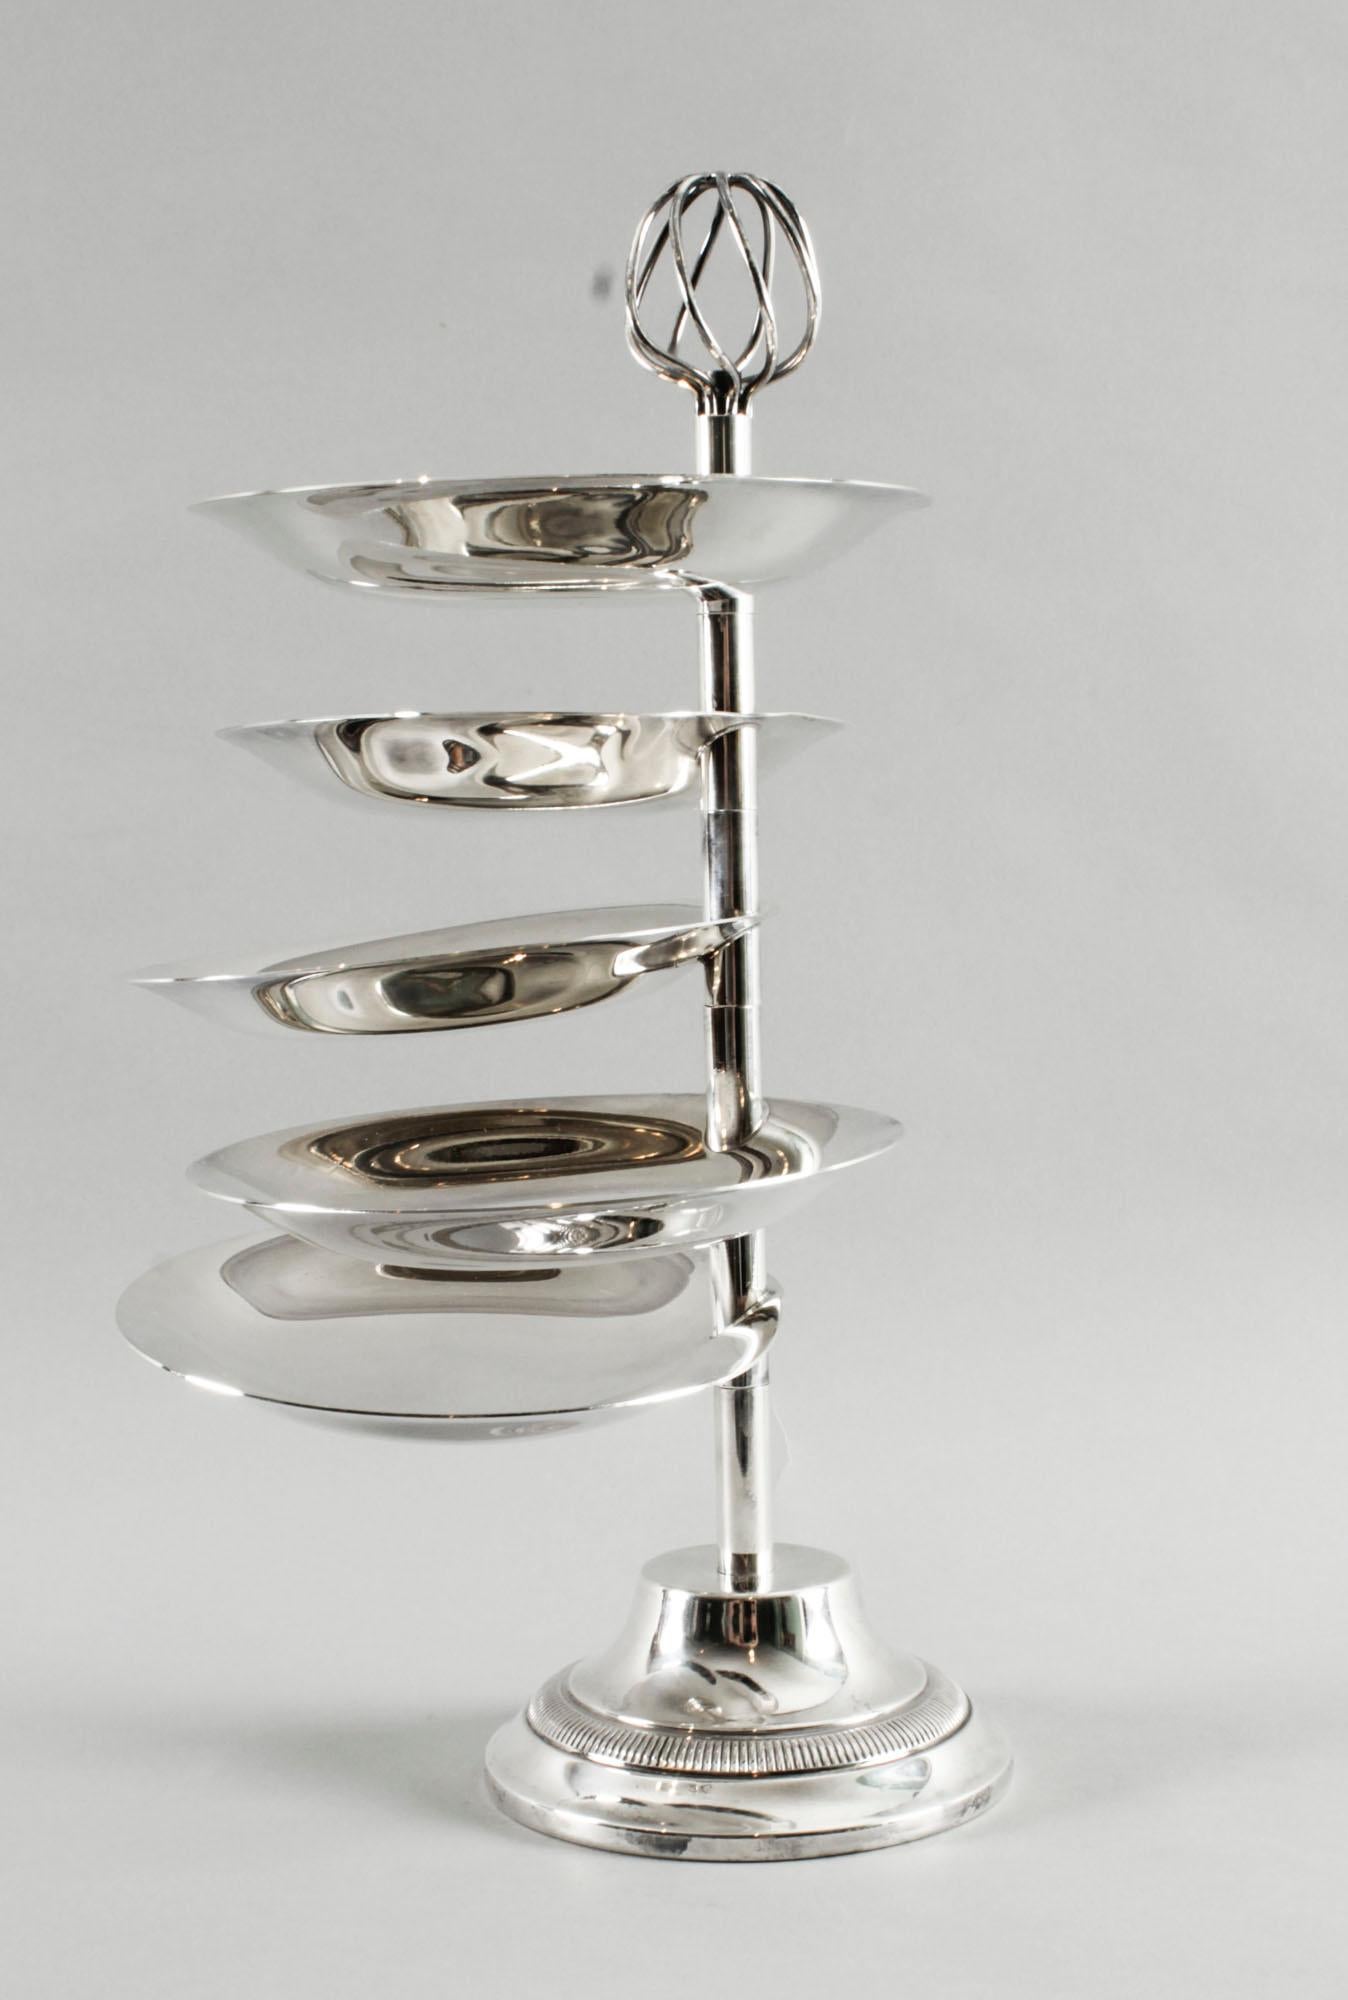 Antique Silver Plated Hors d'oeuvres Stand by Christofle 19th C For Sale 3